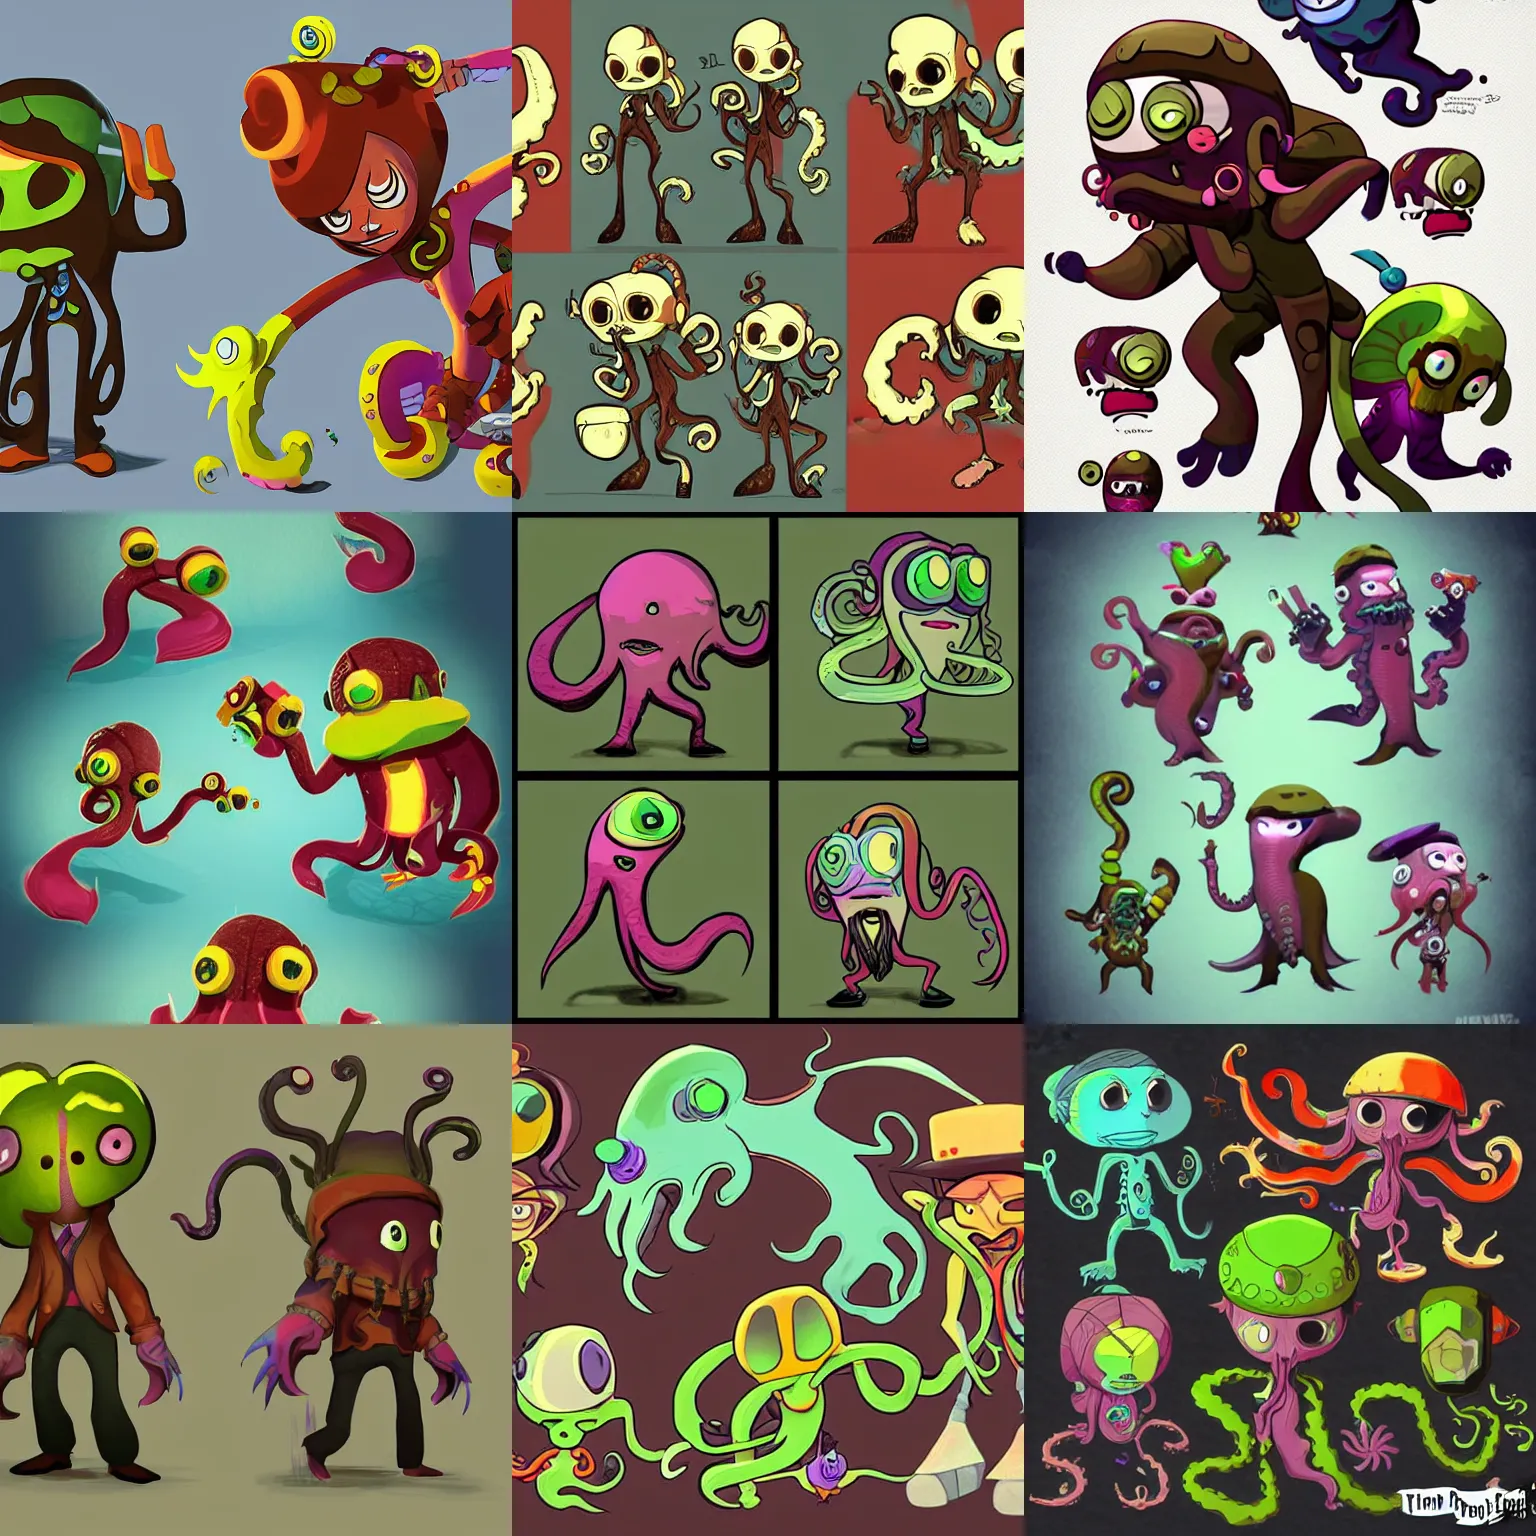 Prompt: kraken based character designs for the newest psychonauts video game made by double fine done by tim shafer and the lead artist that works on Splatoon by Nintendo with help from the artist for the band gorrilaz